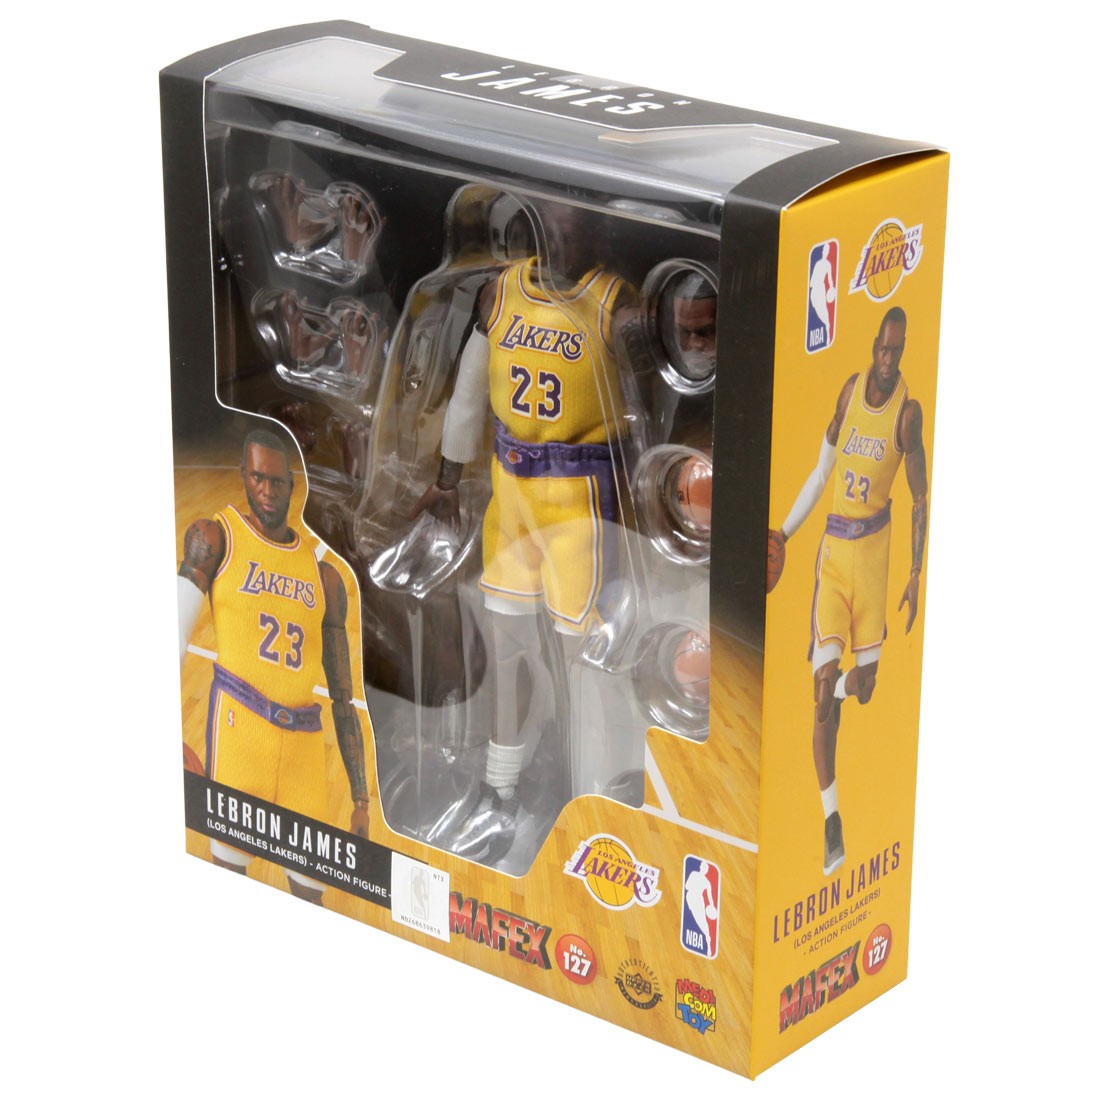 MAFEX Lakers LeBron James Action Figure